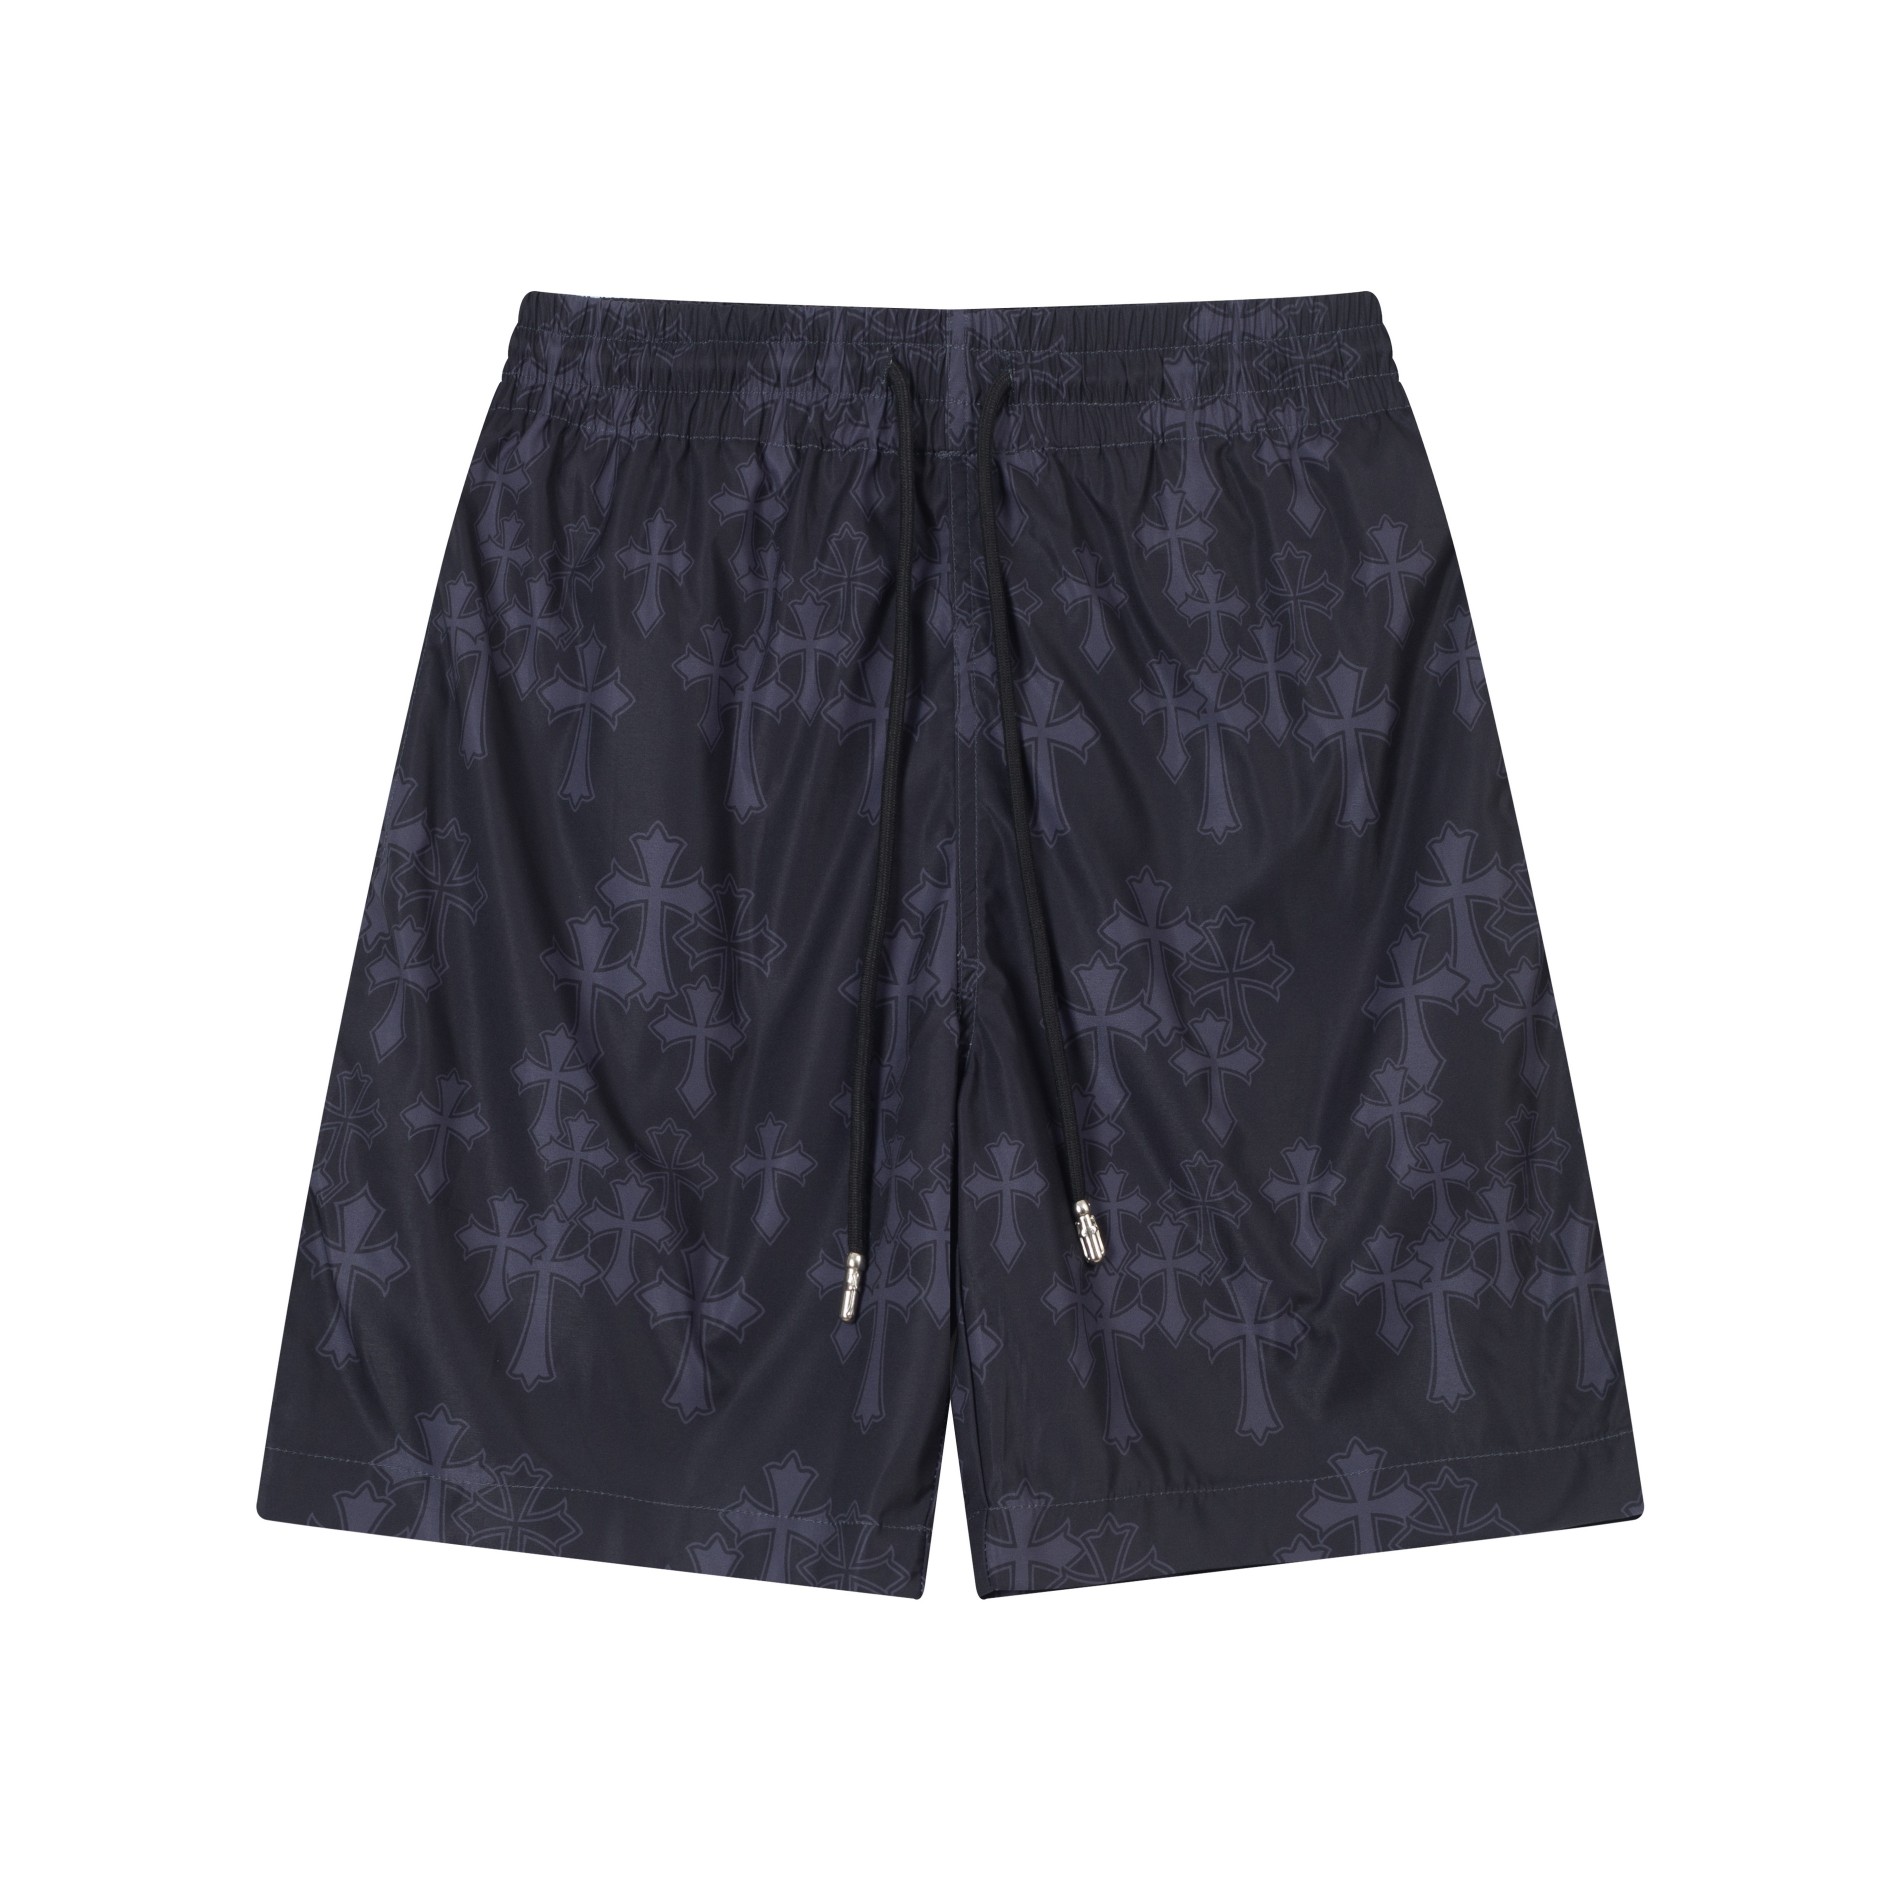 Chrome Hearts Clothing Shorts Polyester Summer Collection Fashion Beach